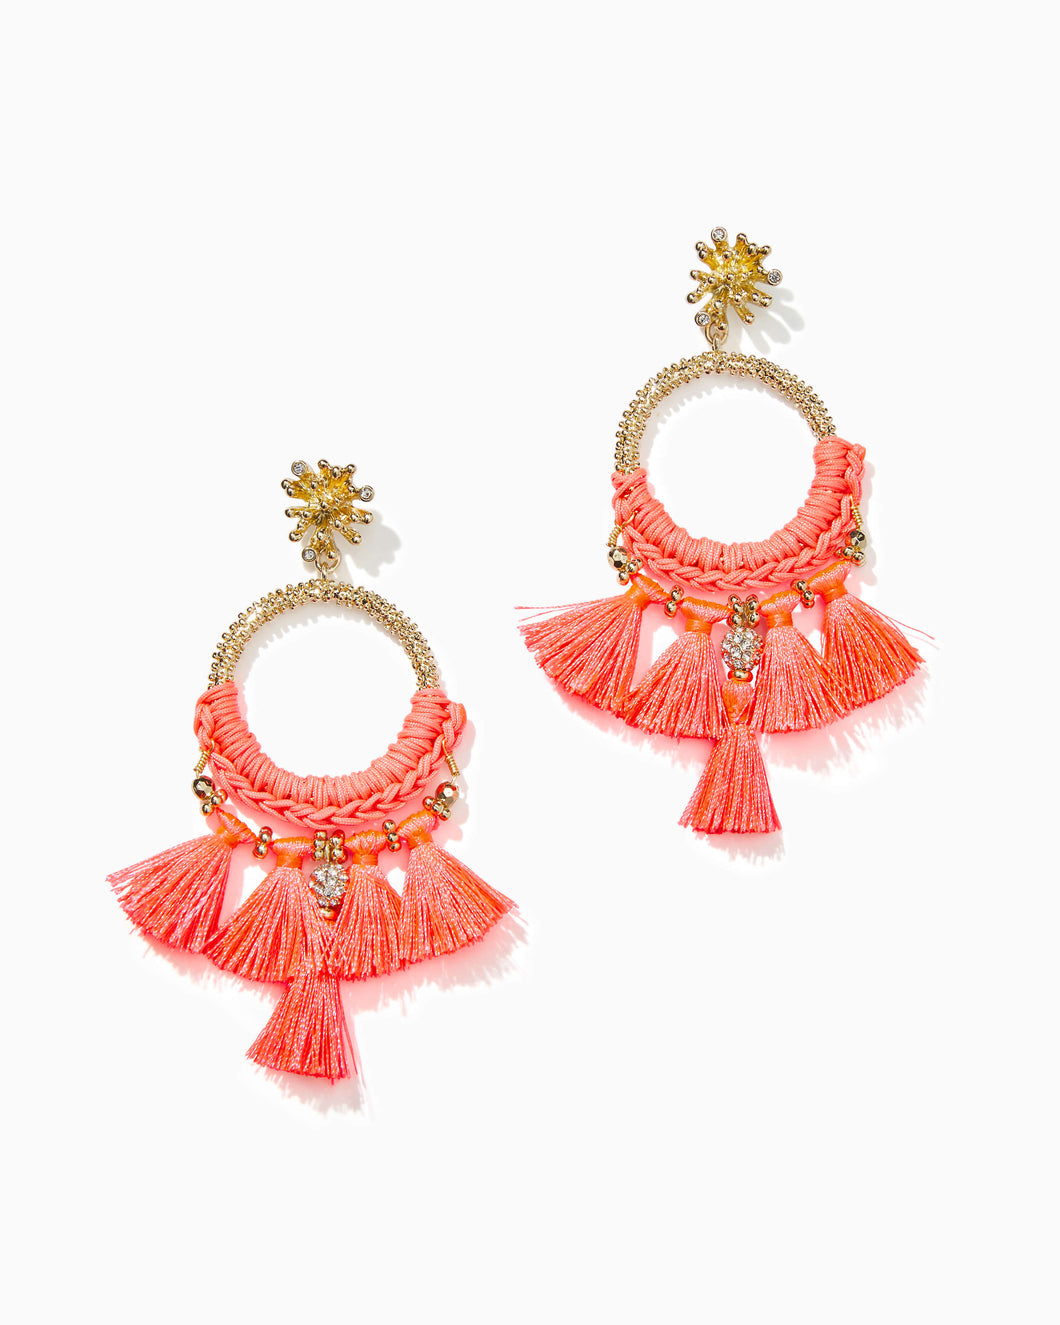 Swim On Over Earrings - Spicy Coral